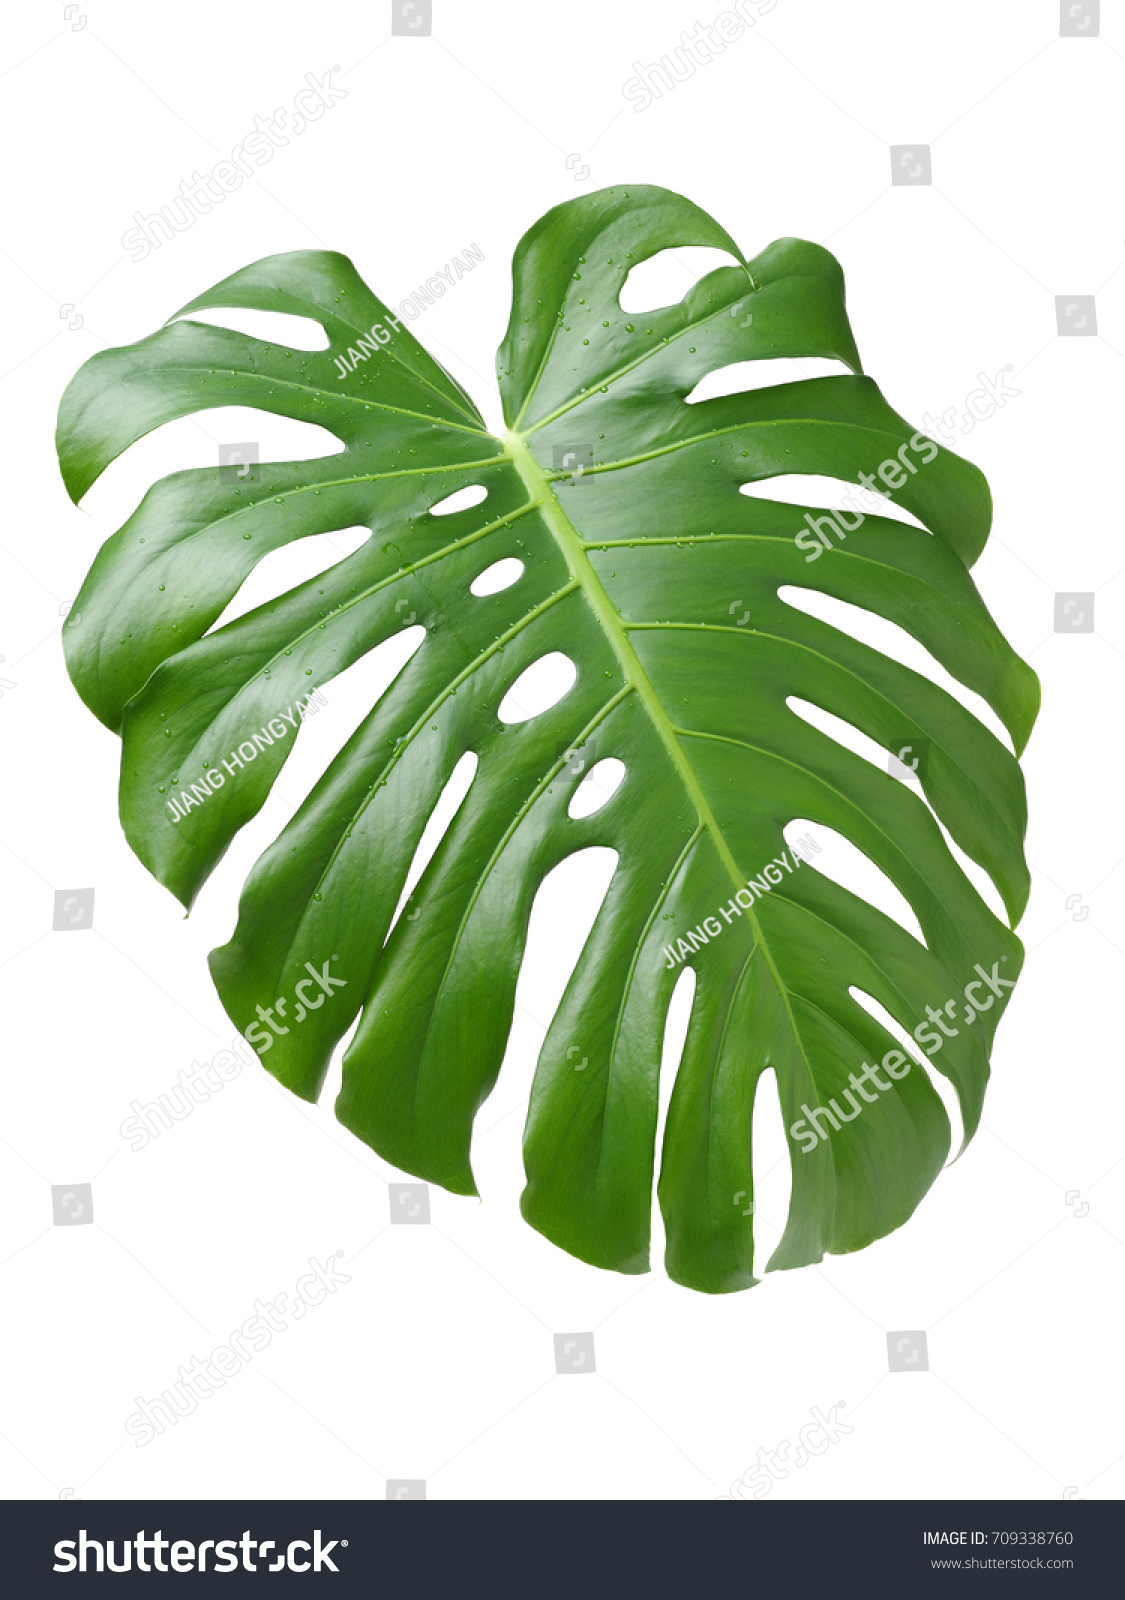 Big green leaf of Monstera plant on white background #709338760